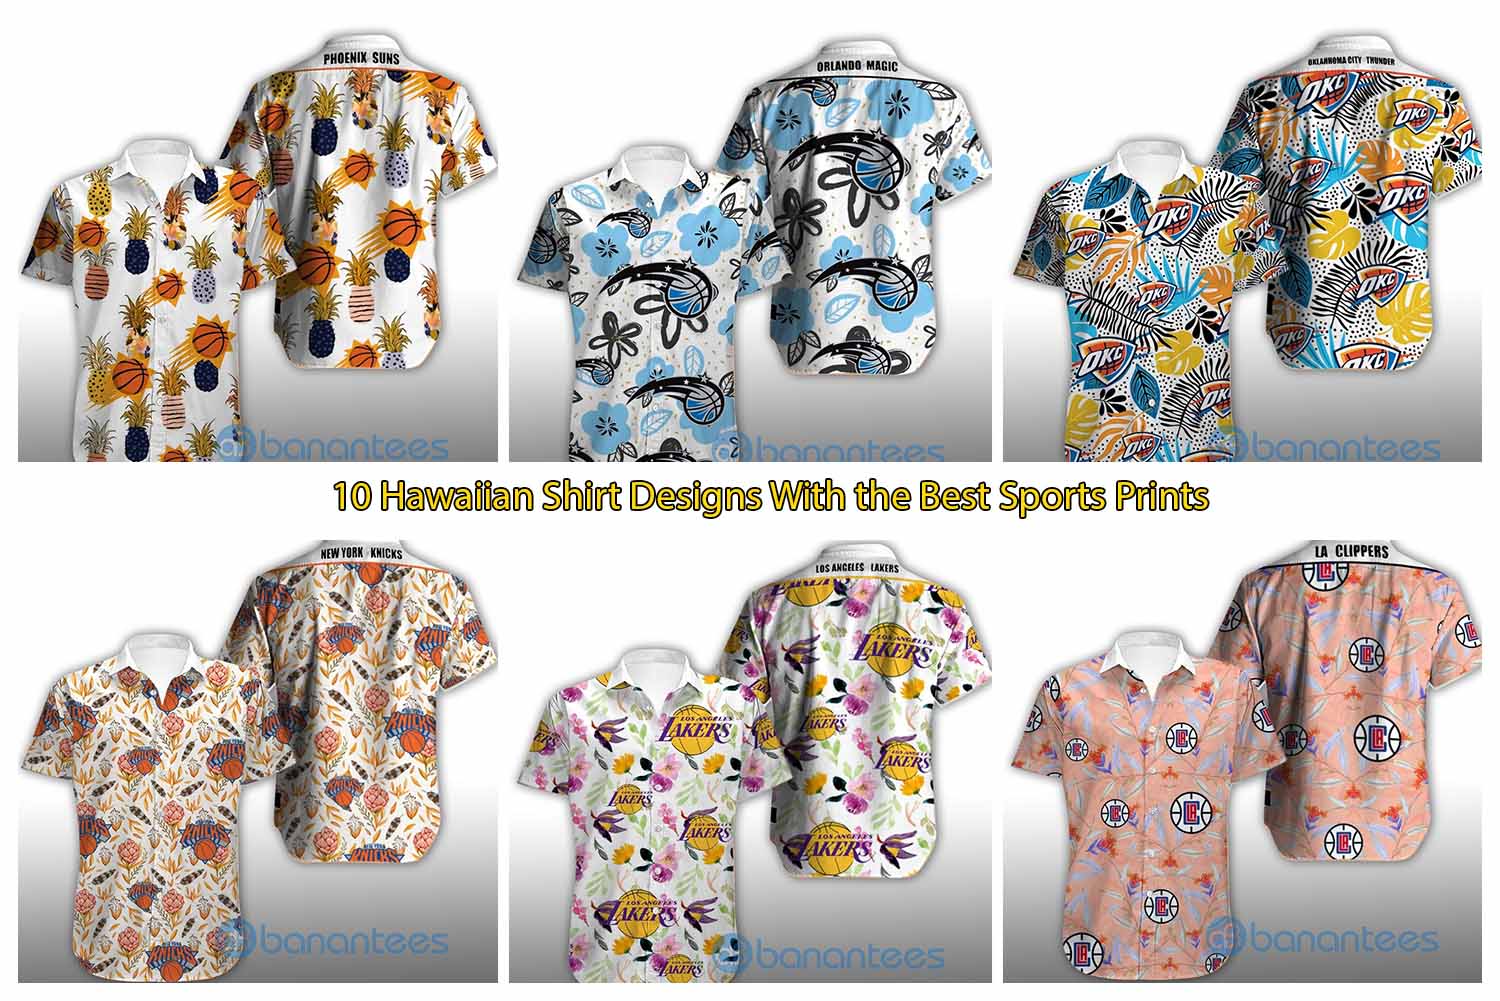 10 Hawaiian Shirt Designs With the Best Sports Prints